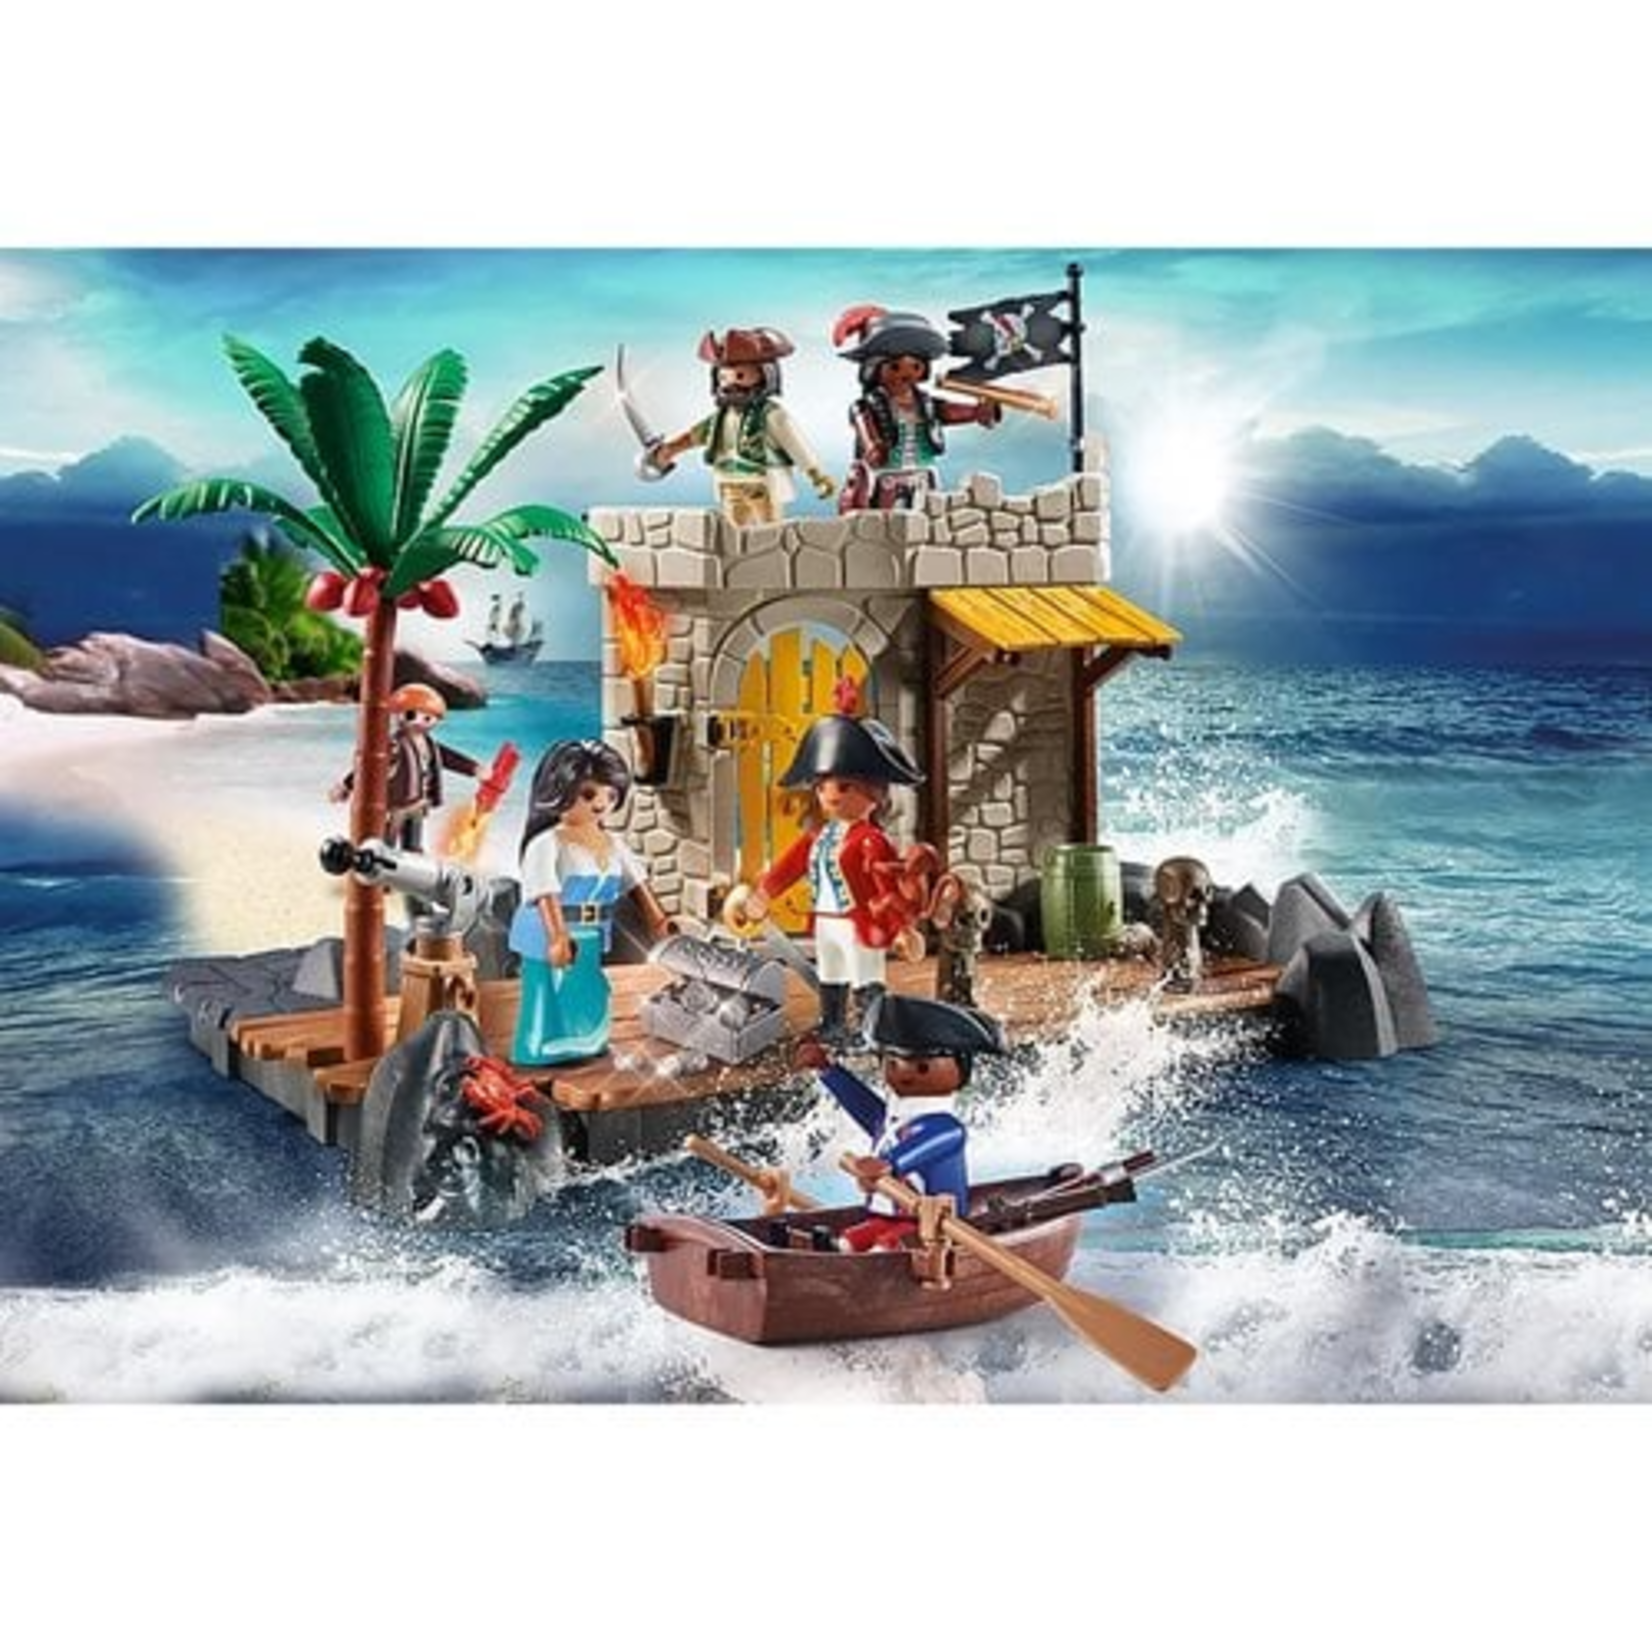 My Figures: Island of the Pirates - 70979